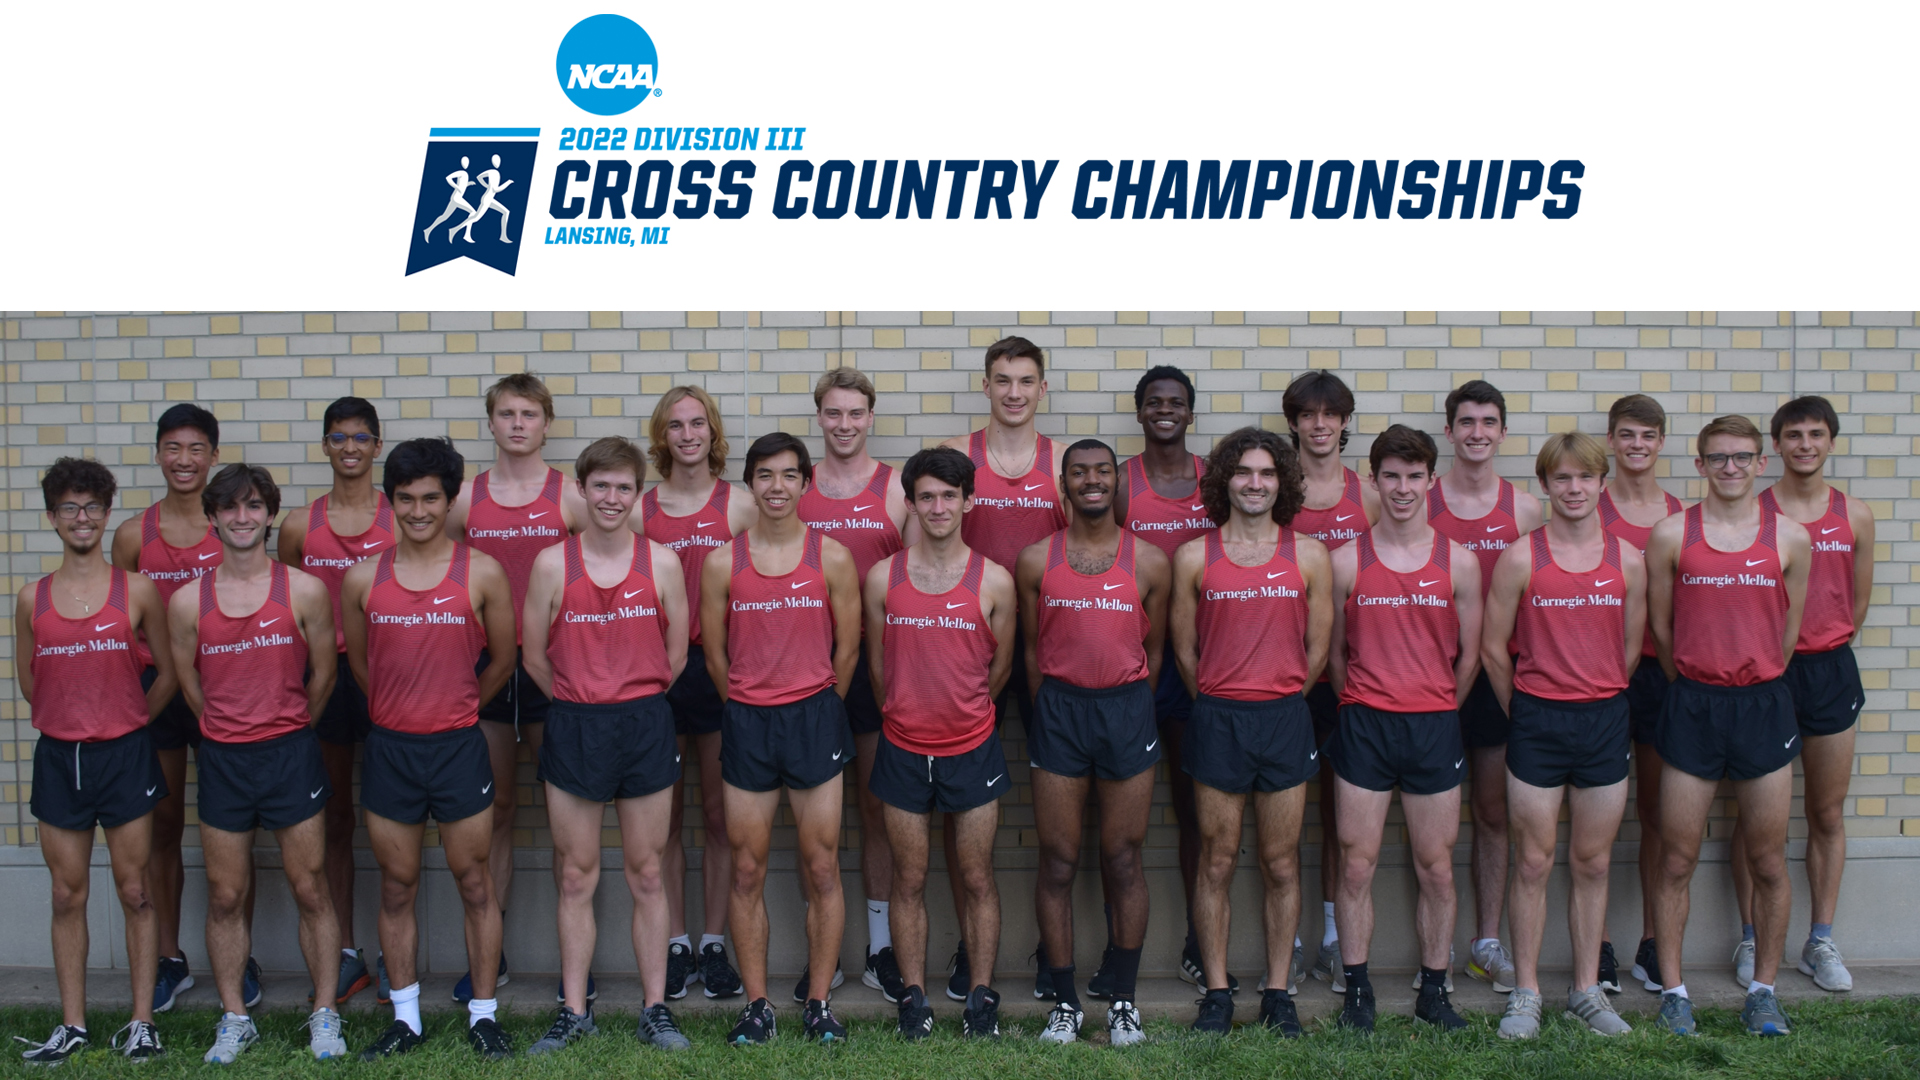 men's cross country team photo with members standing in two rows with NCAA Division III Cross Country Championships Logo